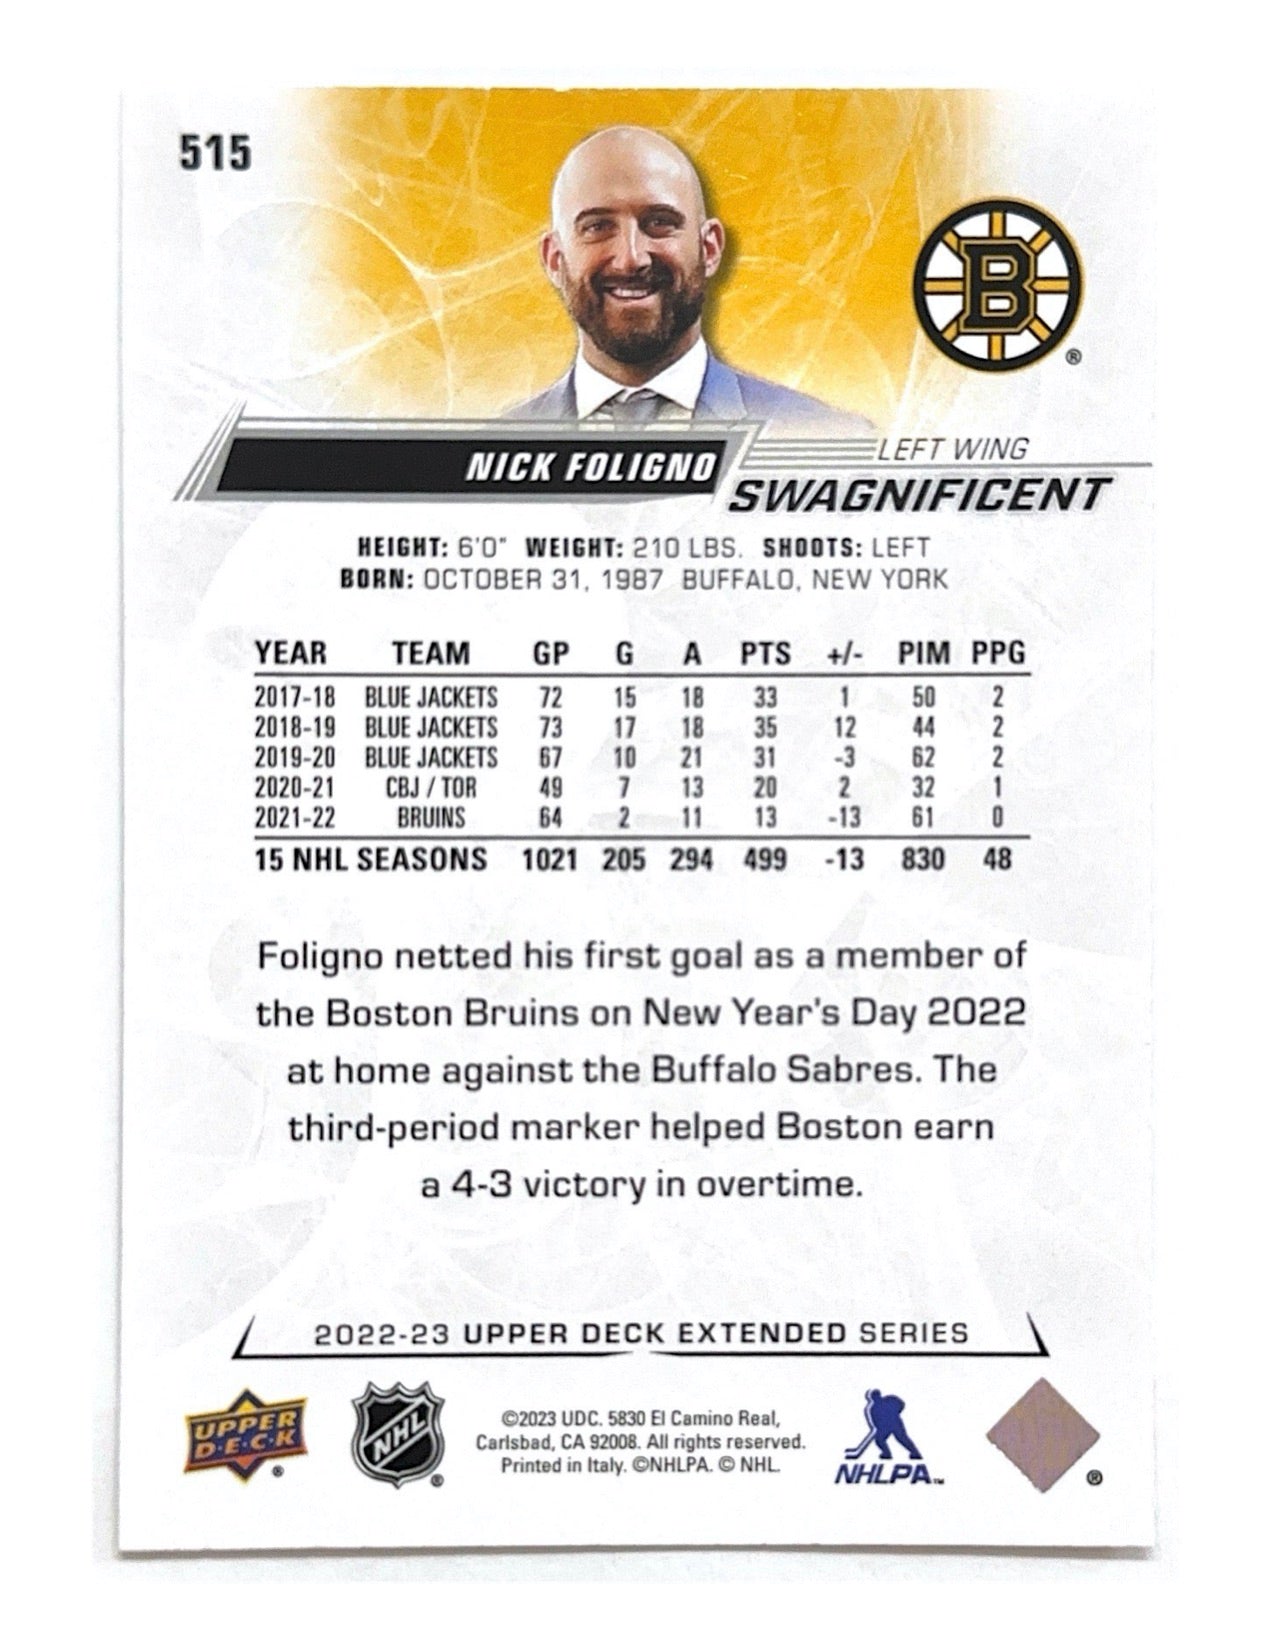 Nick Foligno 2022-23 Upper Deck Extended Series Swagnificent #515